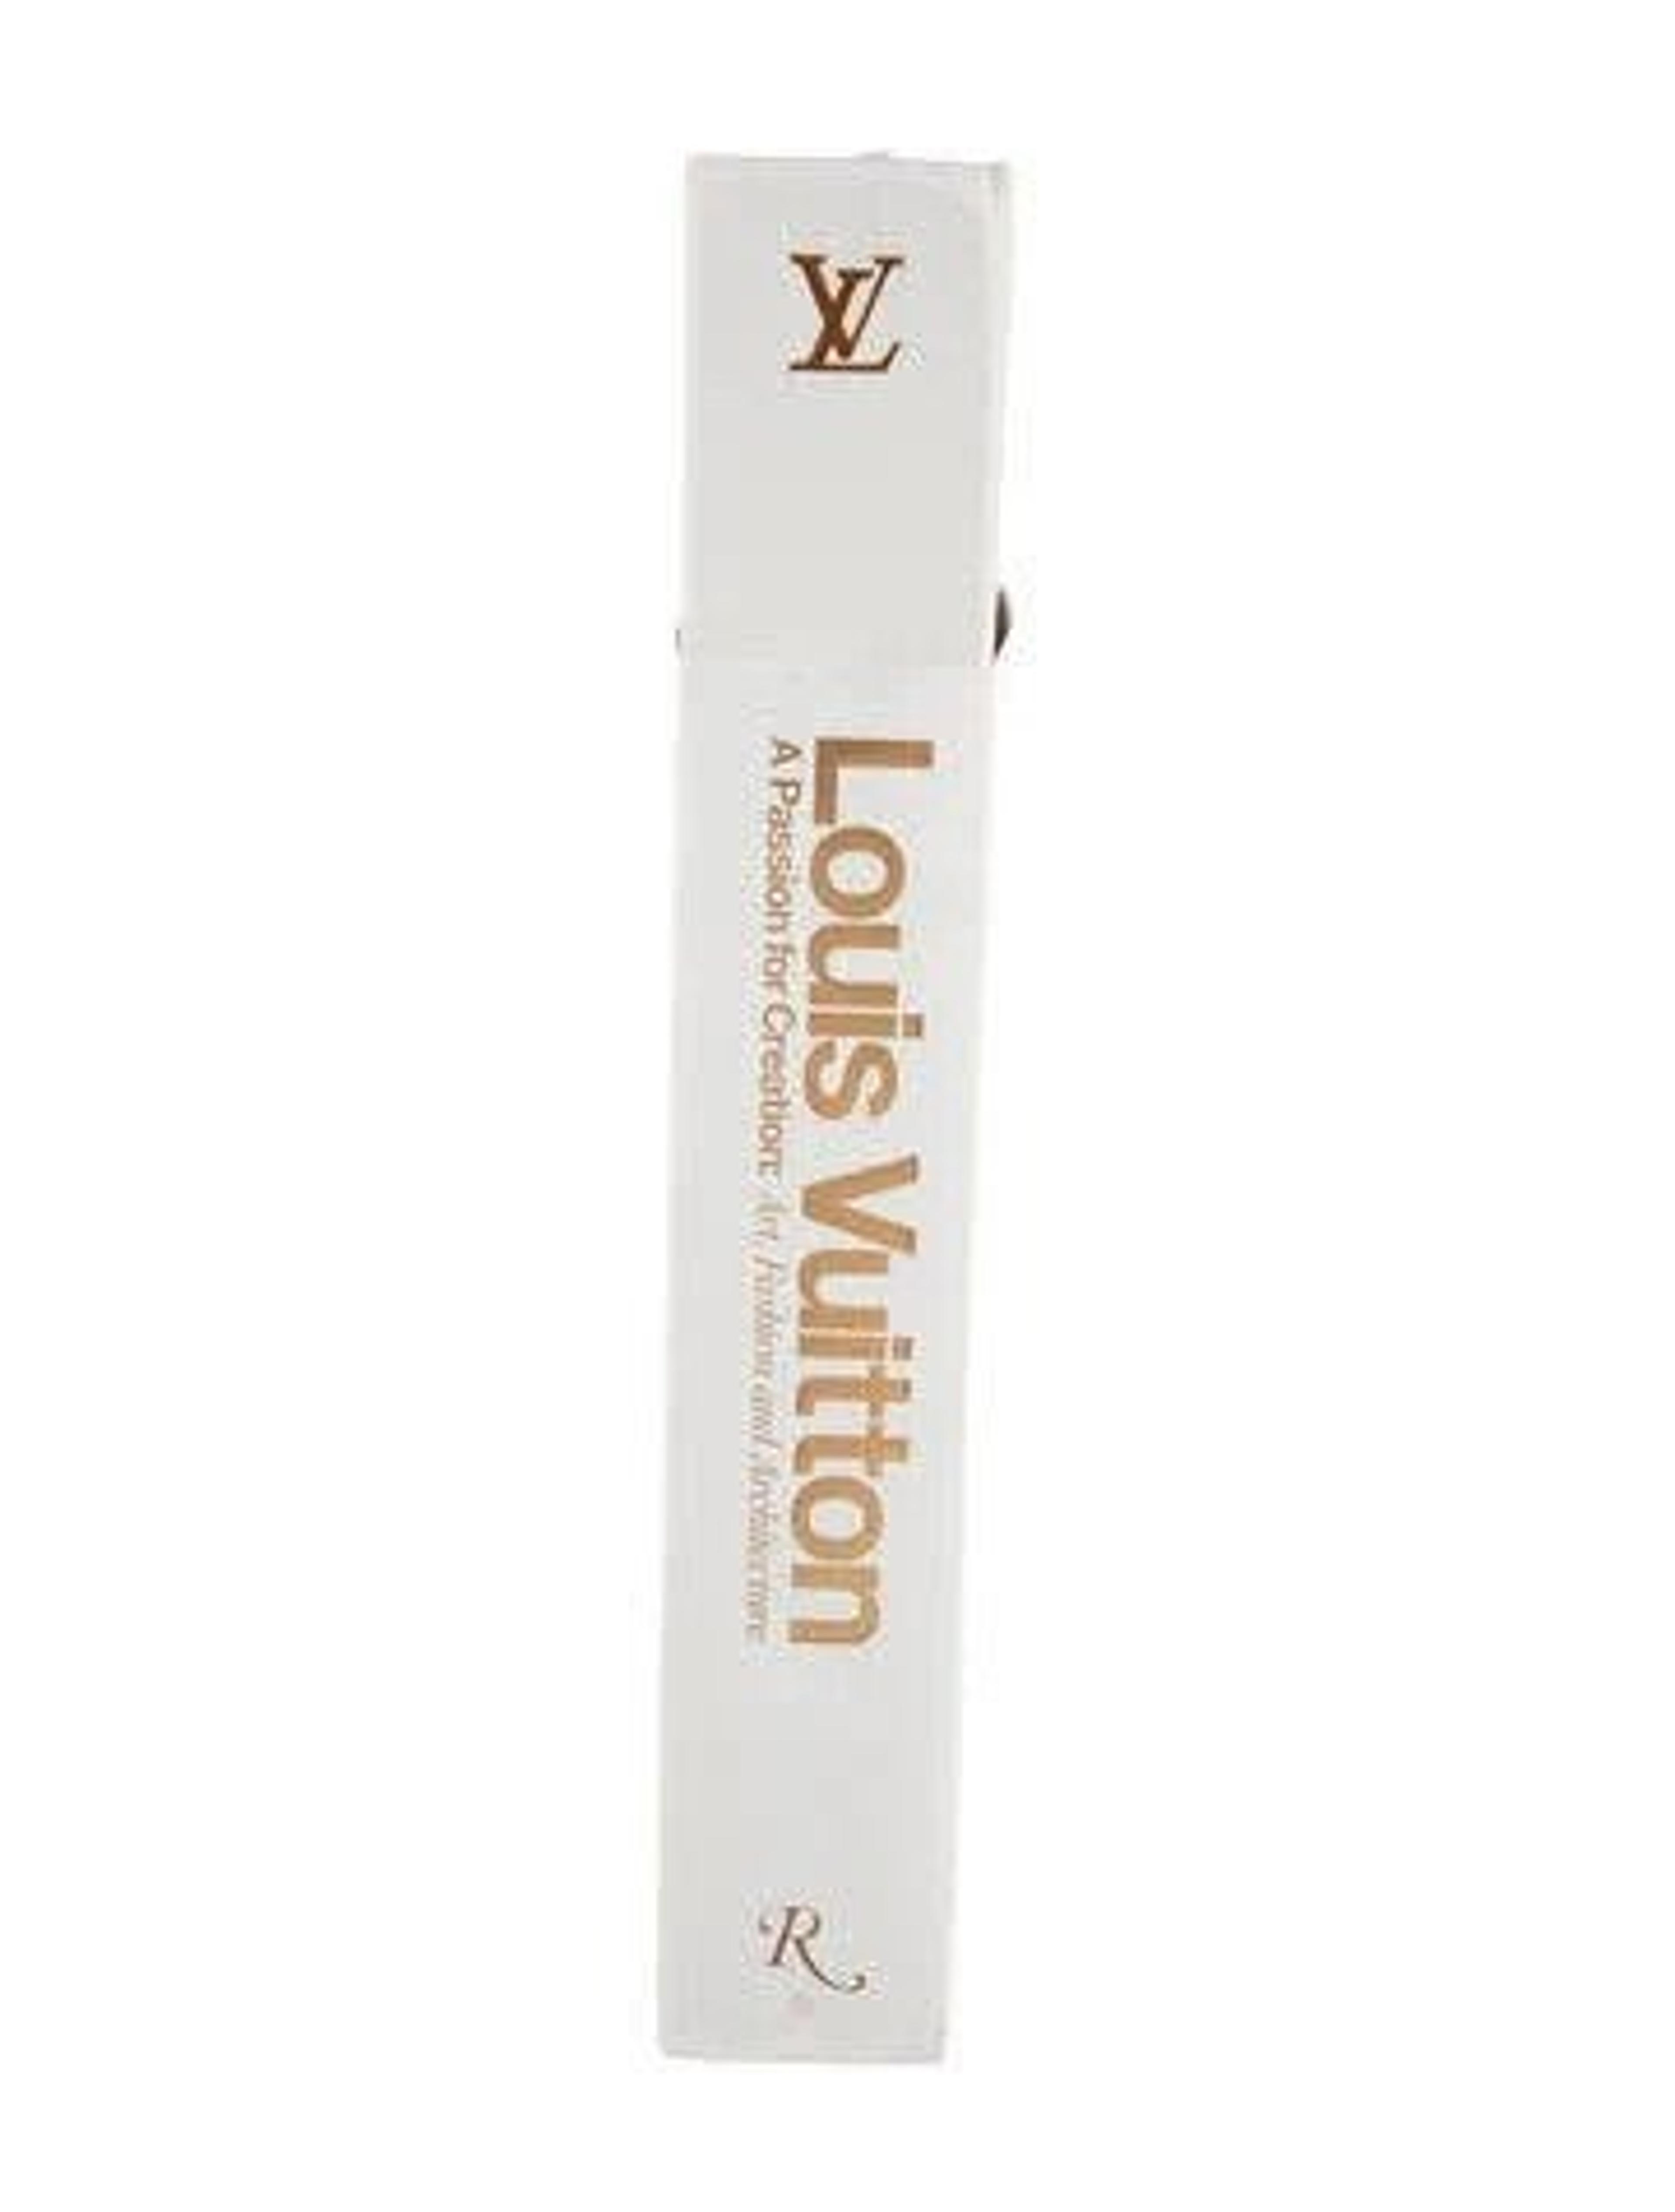 Louis Vuitton - by Valerie Steele (Hardcover)